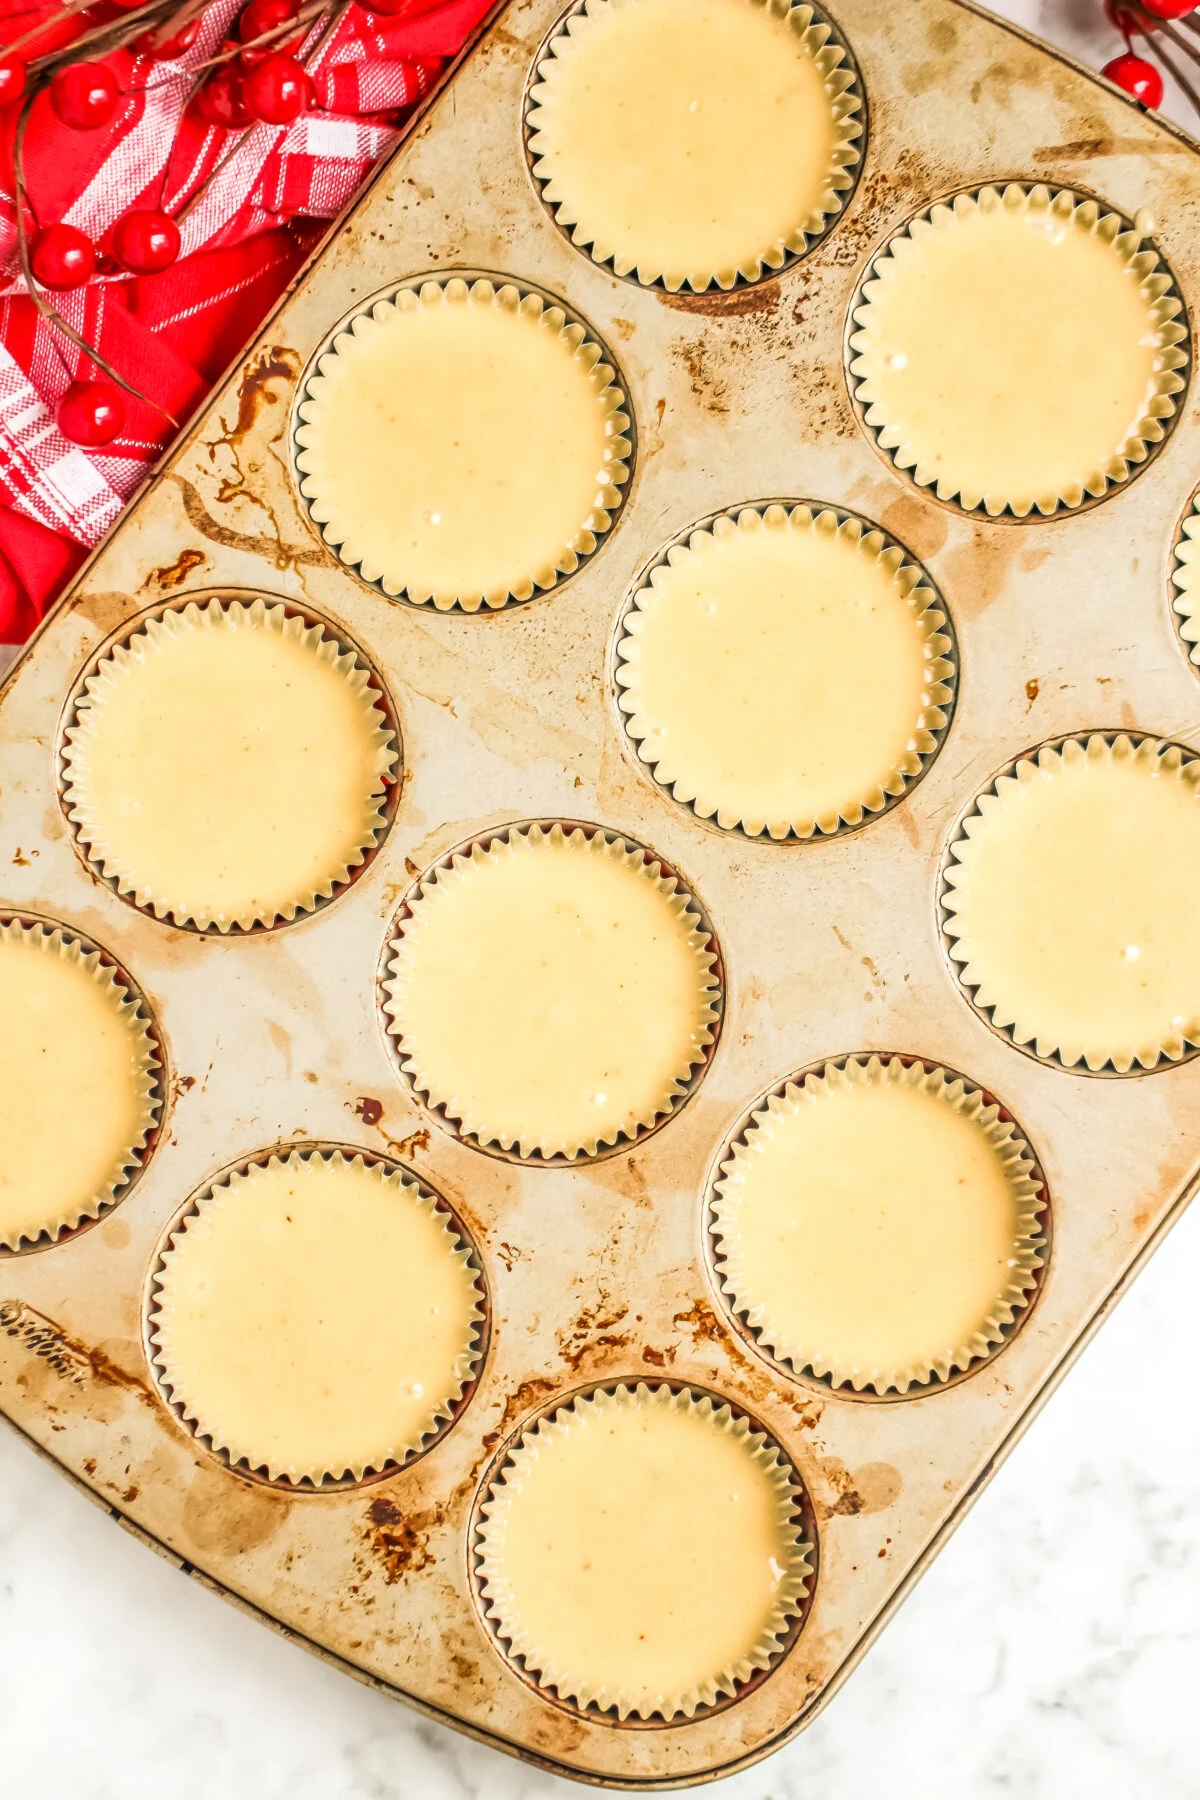 Muffin tins filled with cupcake batter.